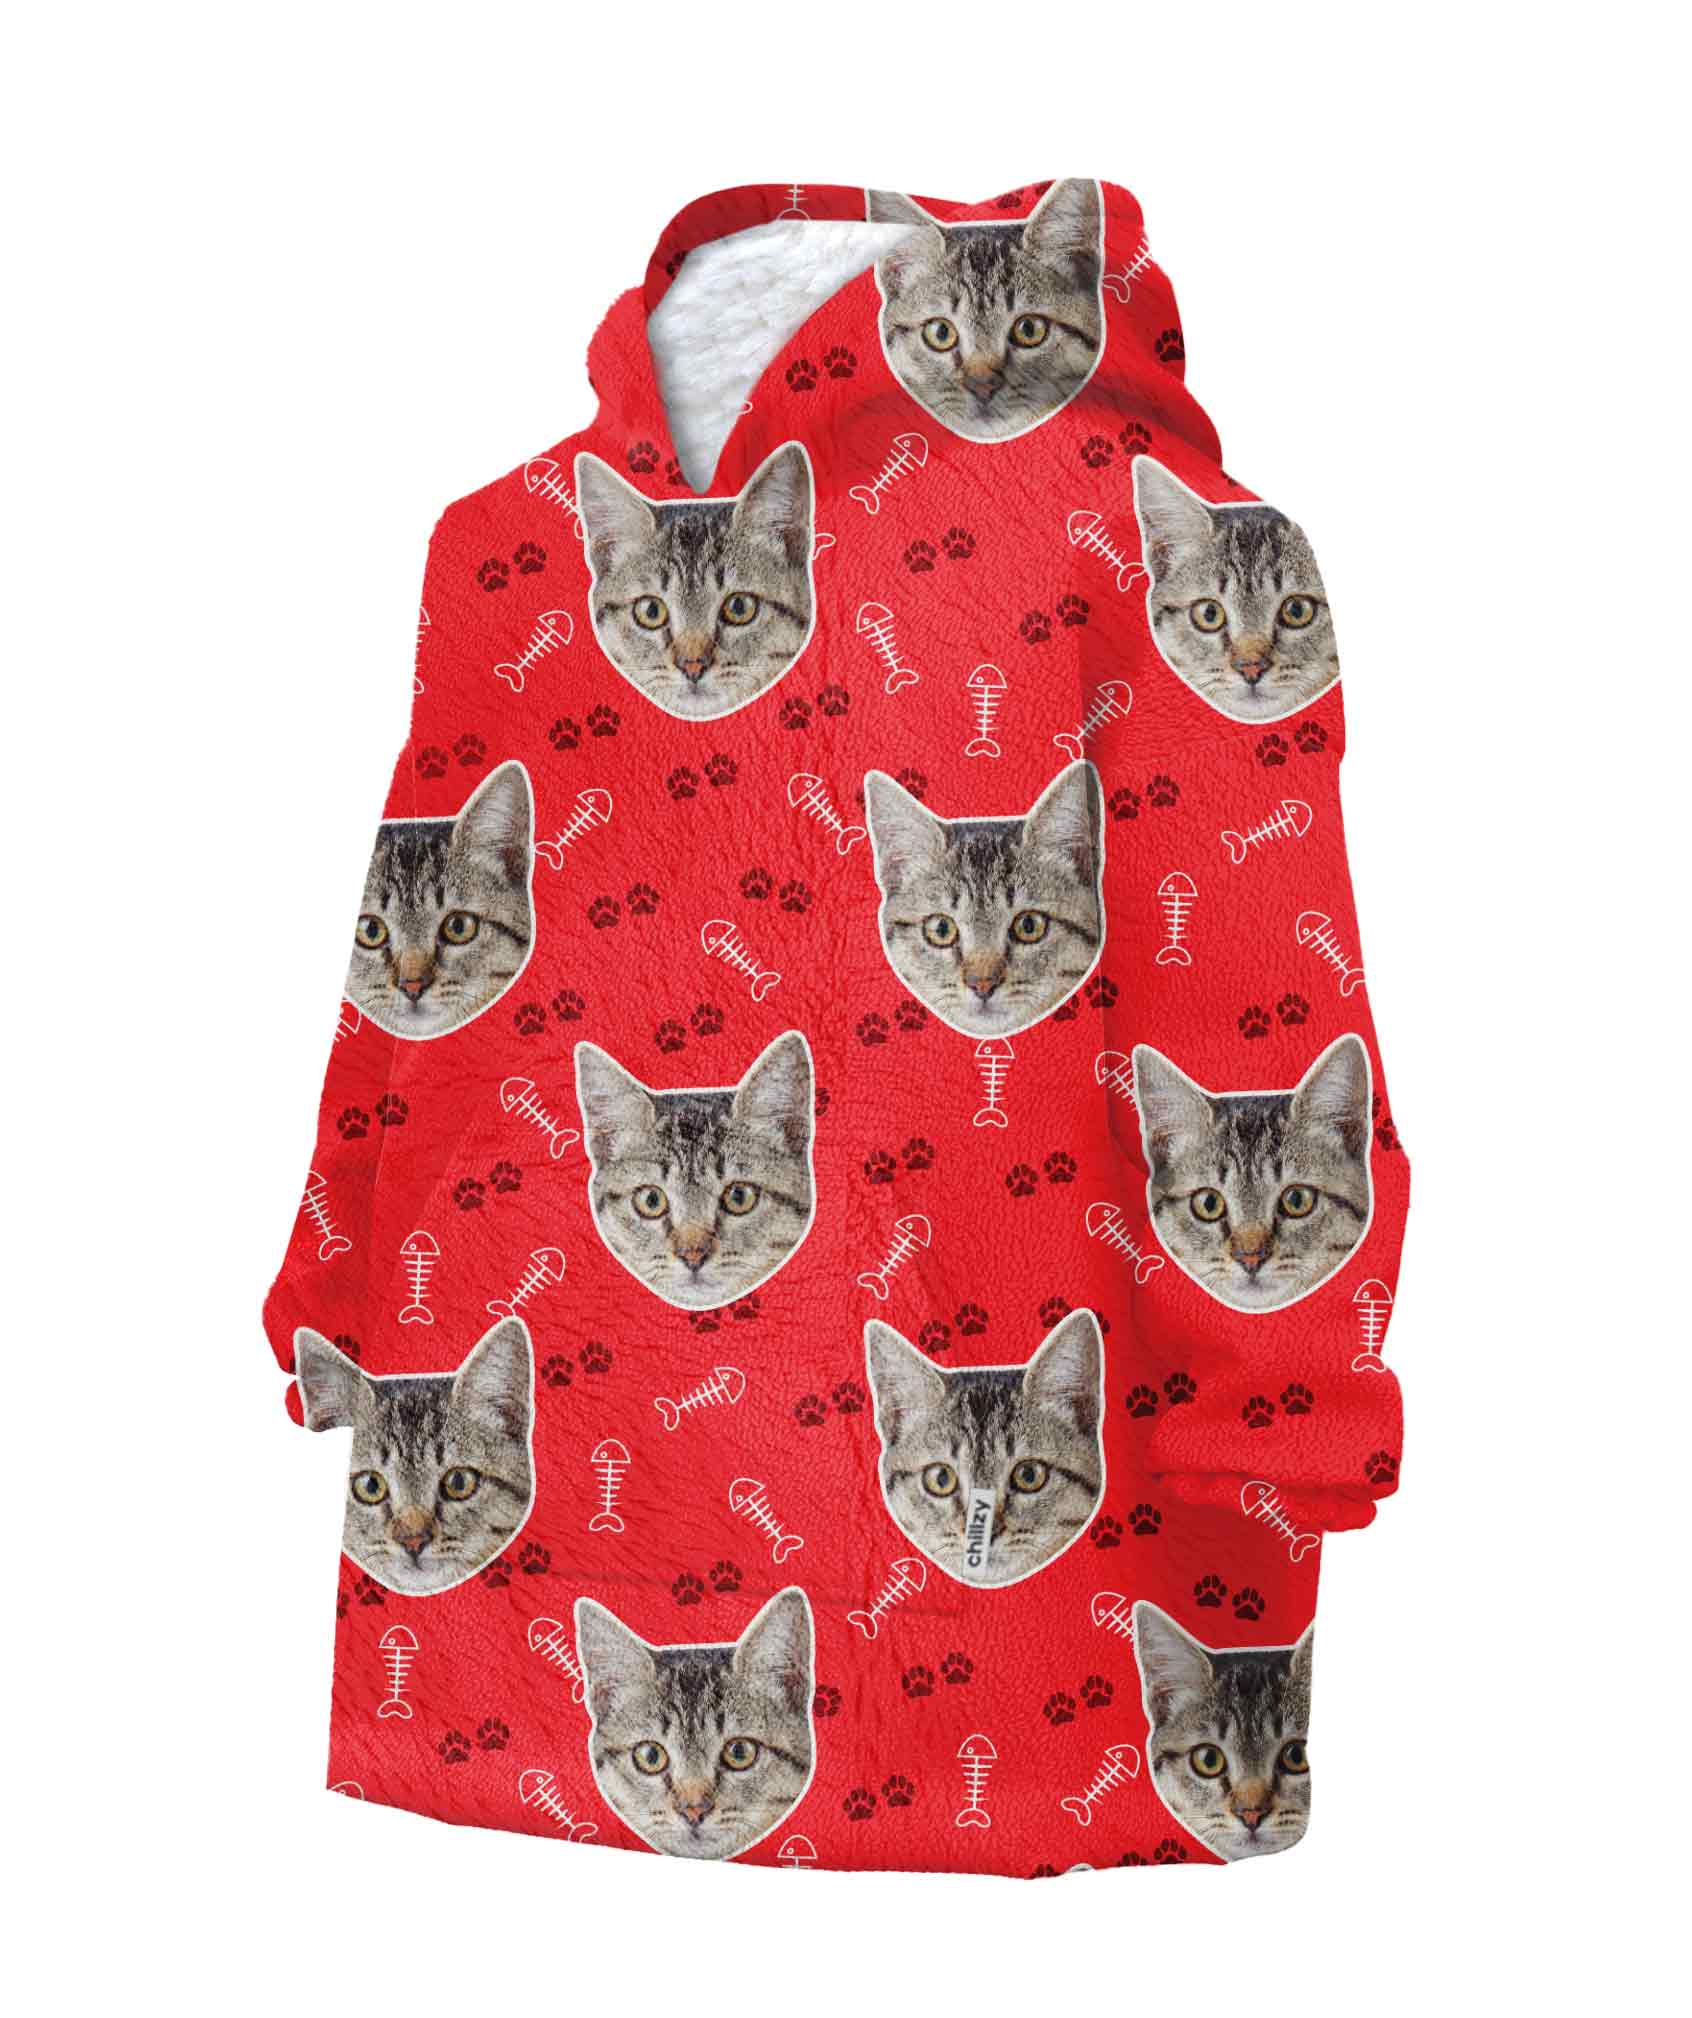 Your Cat Chillzy Kids Hoodie Blanket